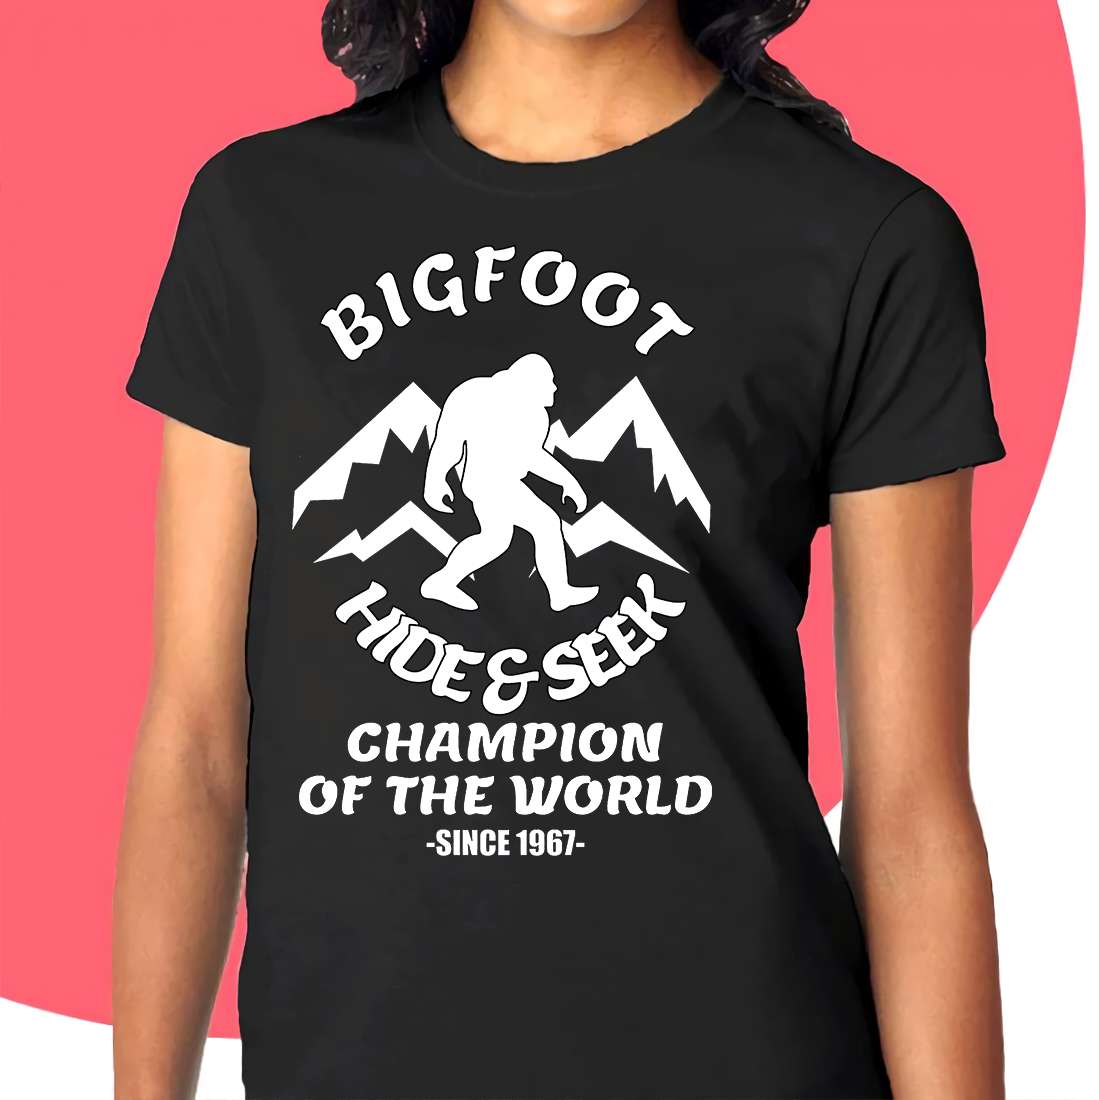 Bigfoot on the mountain - Bigfoot hide and seek champion of the world since 1967